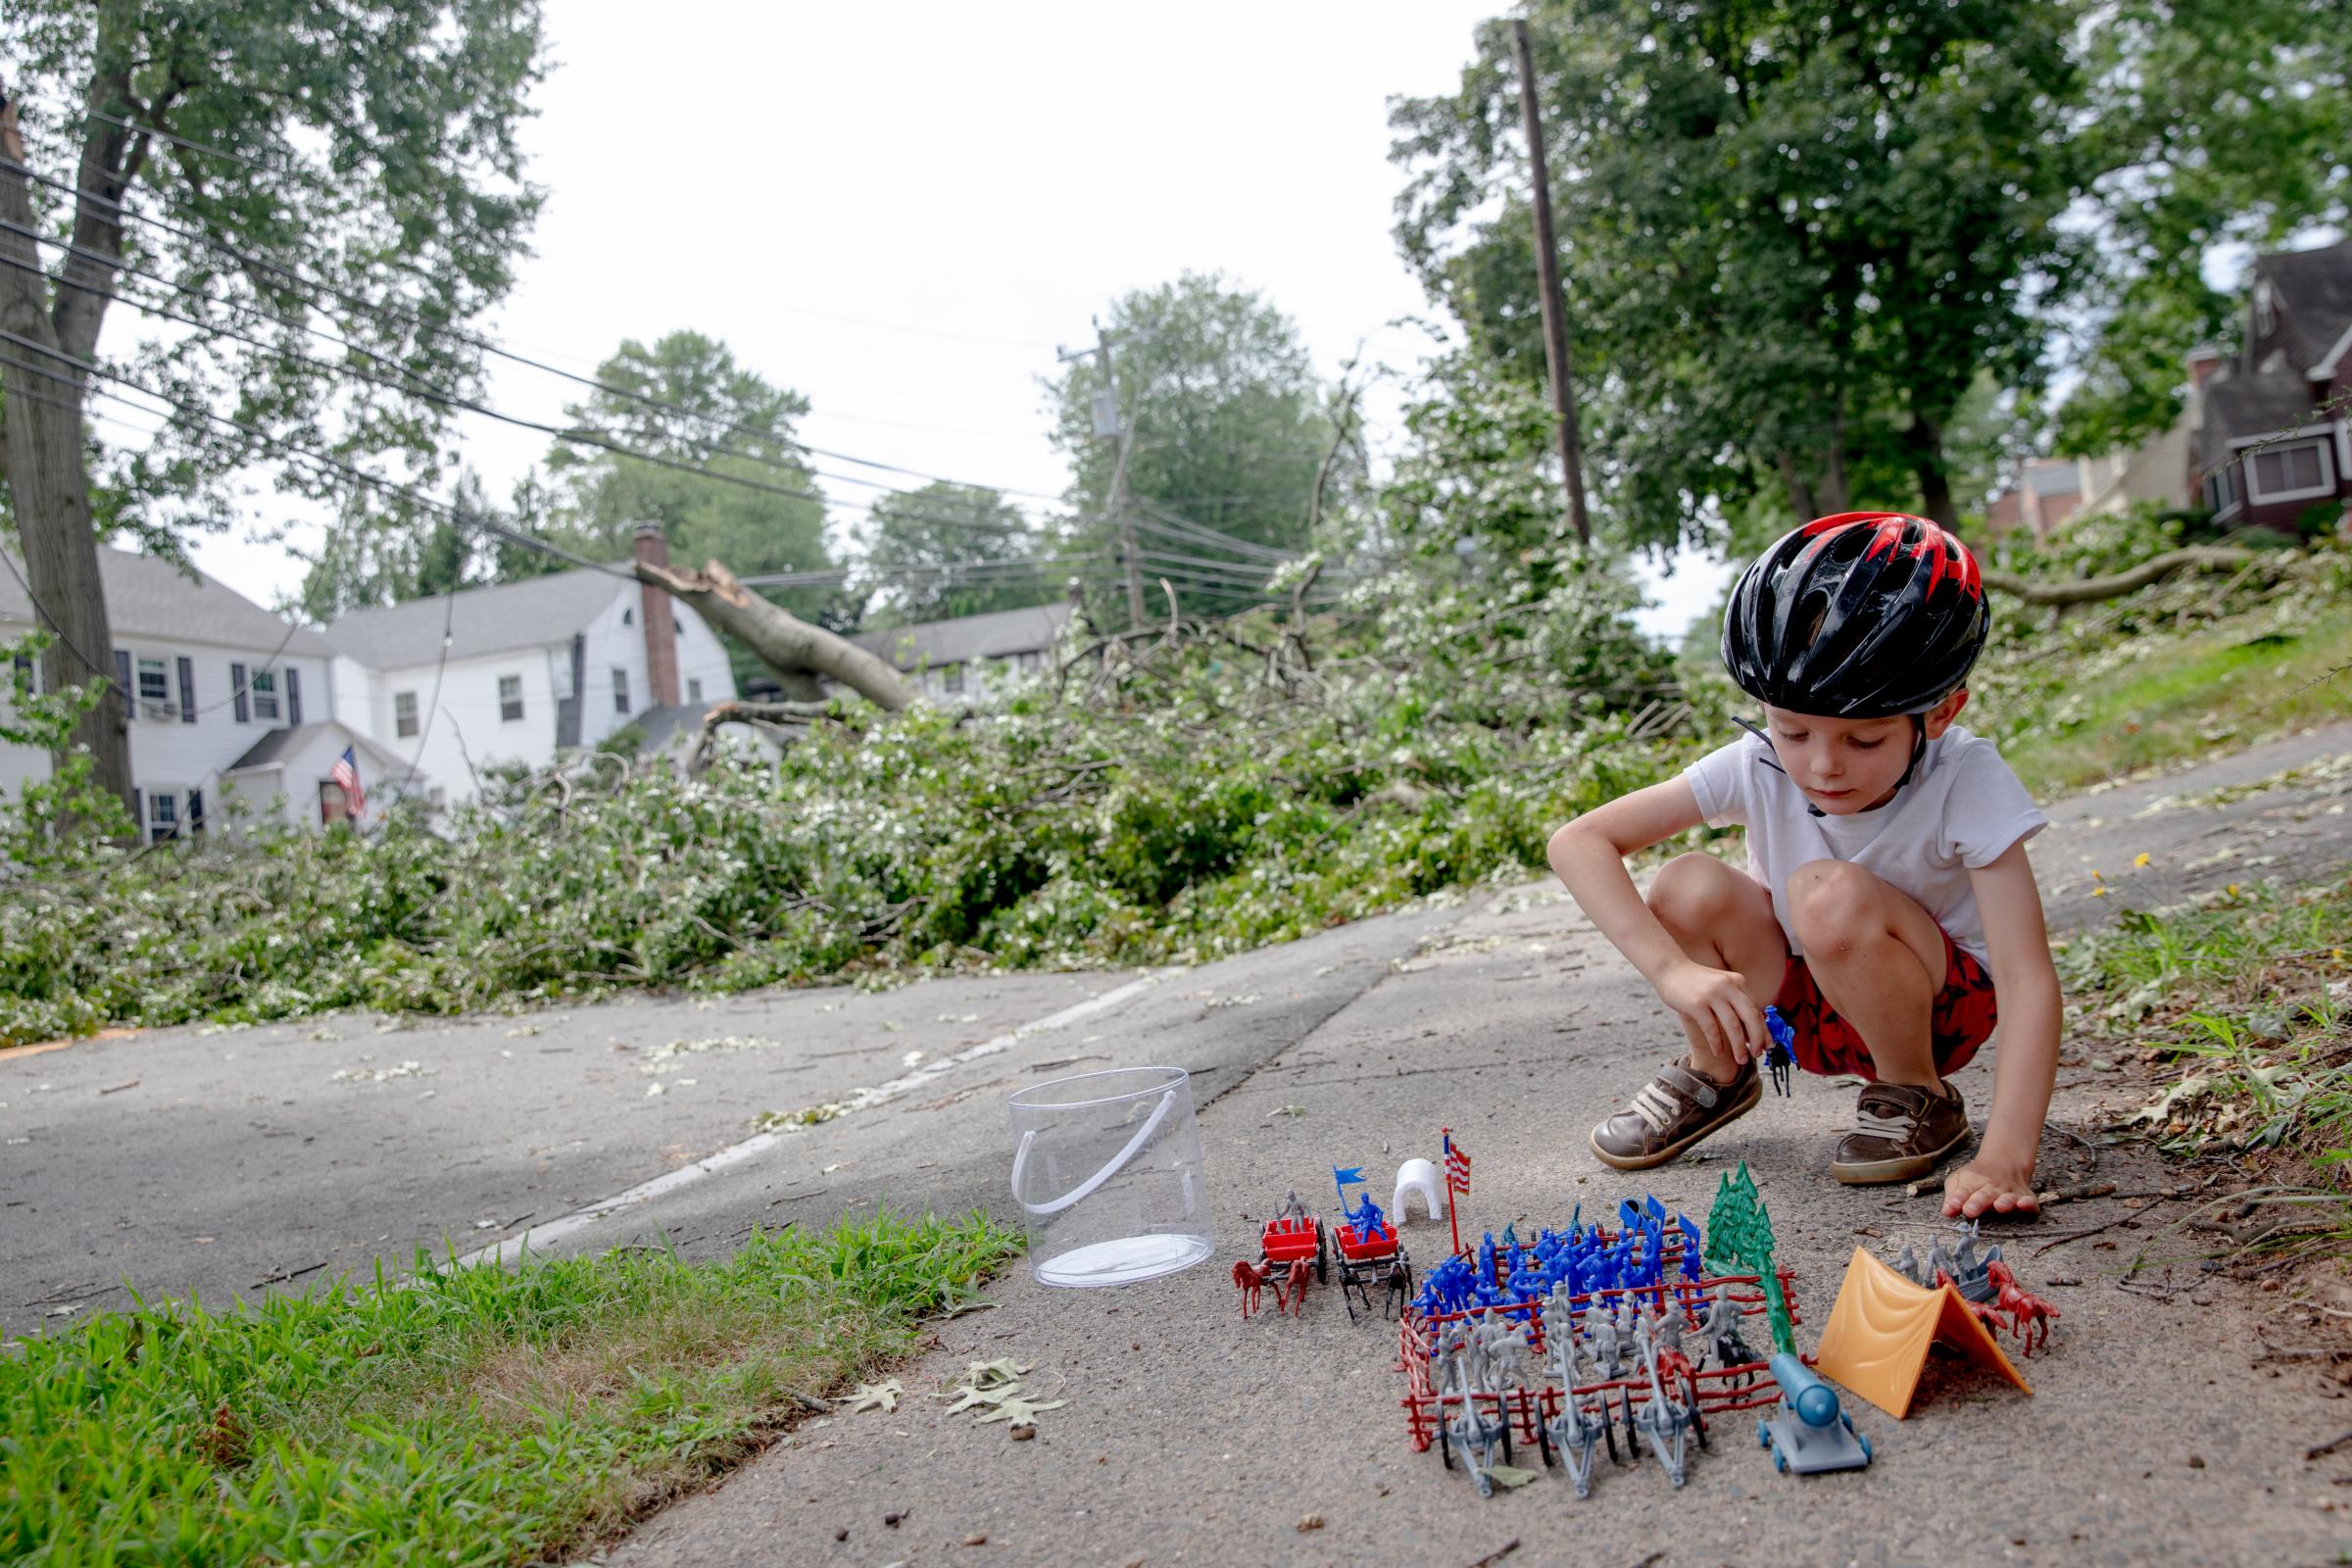 Leif Sondeen, 6, hangs out next to a blocked car road after Tropical Storm Isaias hit his neighborhood in West Hartford. Leif also rode a bike on the blocked road throughout the afternoon. &quot;He was saying how it was exciting not to have cars,&quot; said his mom, Danielle Sondeen.